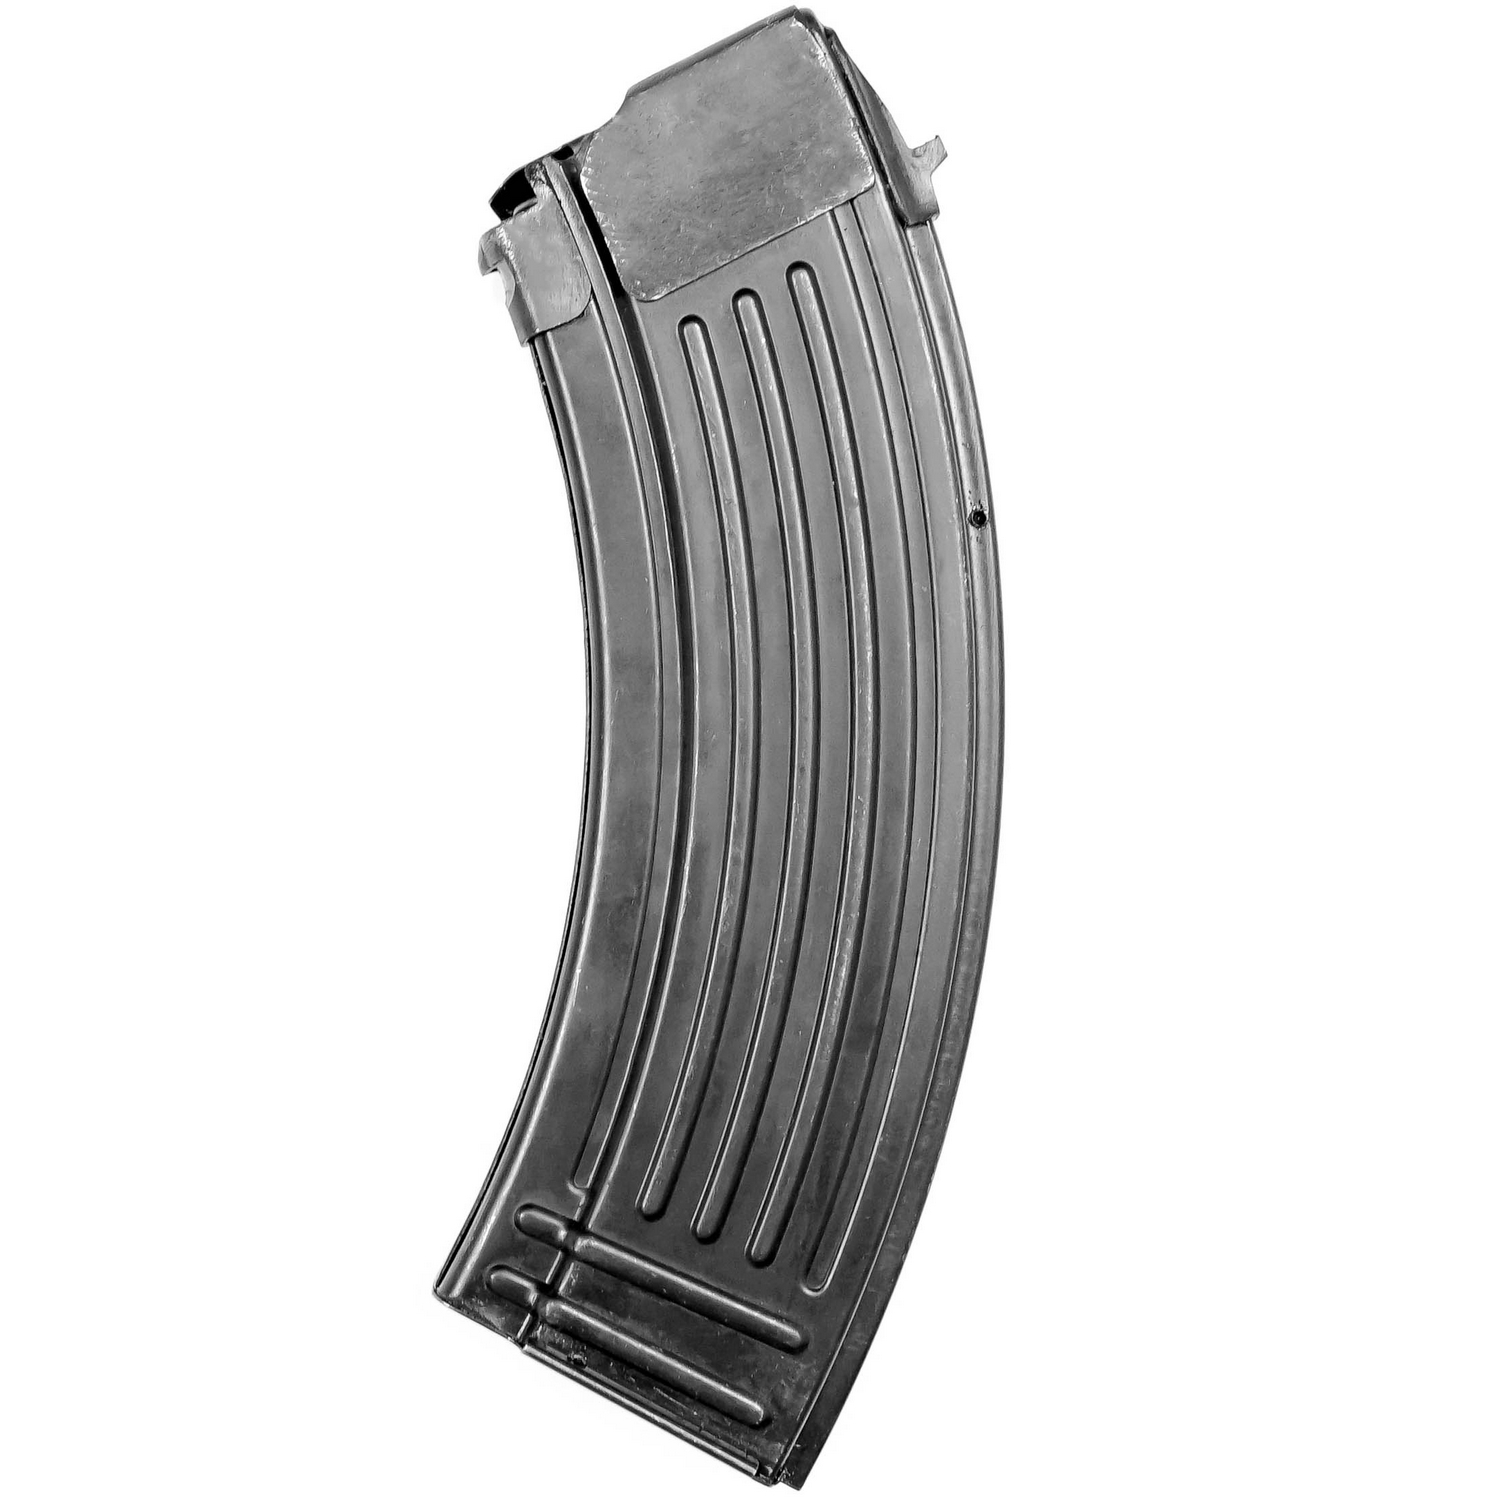 Spare 5/30 Magazine for Type 81 rifle